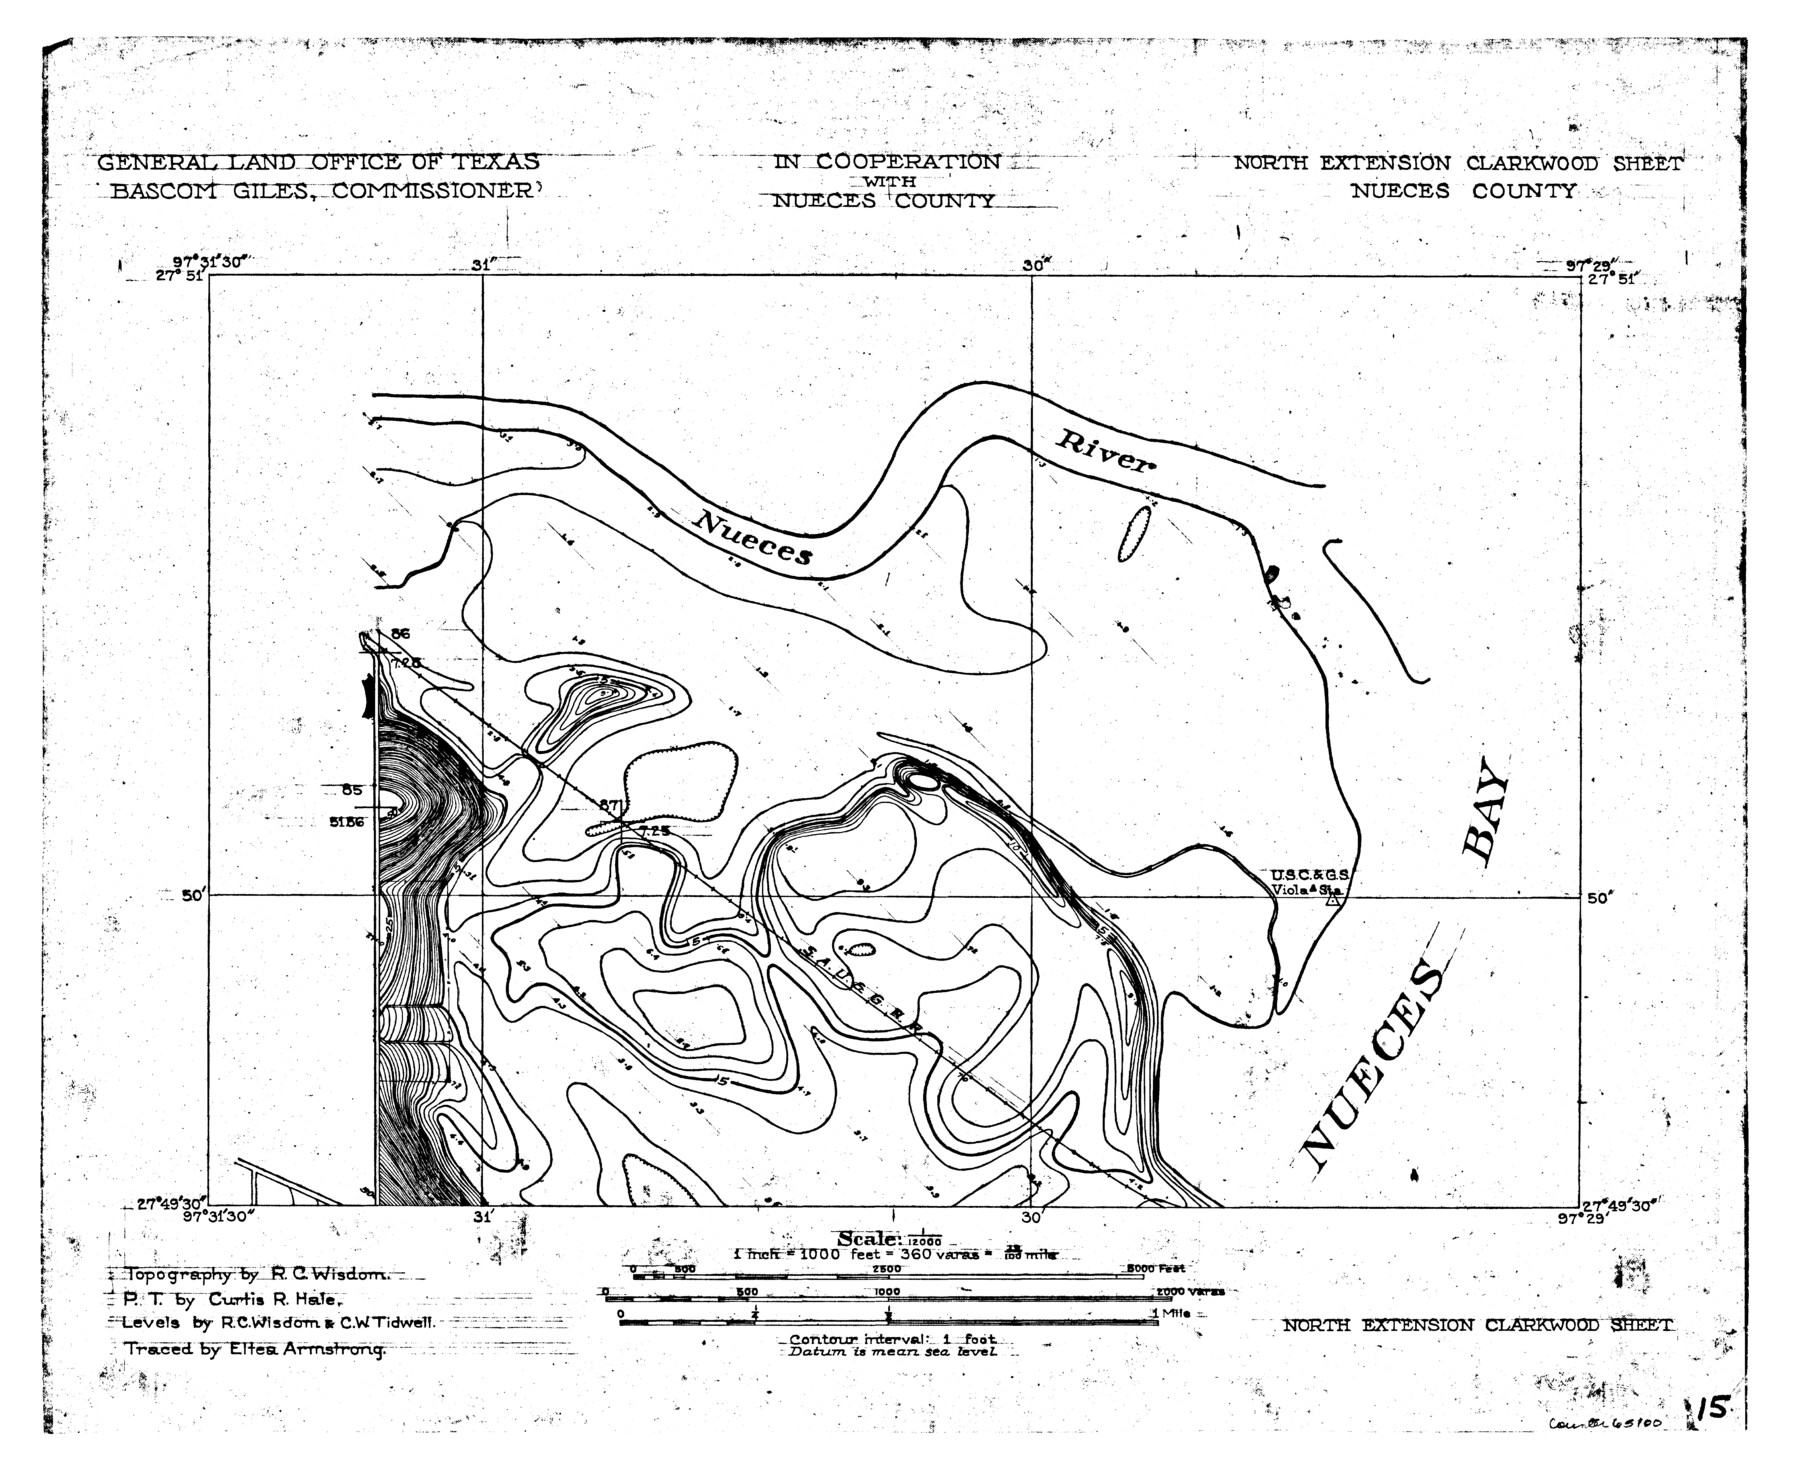 65100, Nueces River, North Extension Clarkwood Sheet, General Map Collection